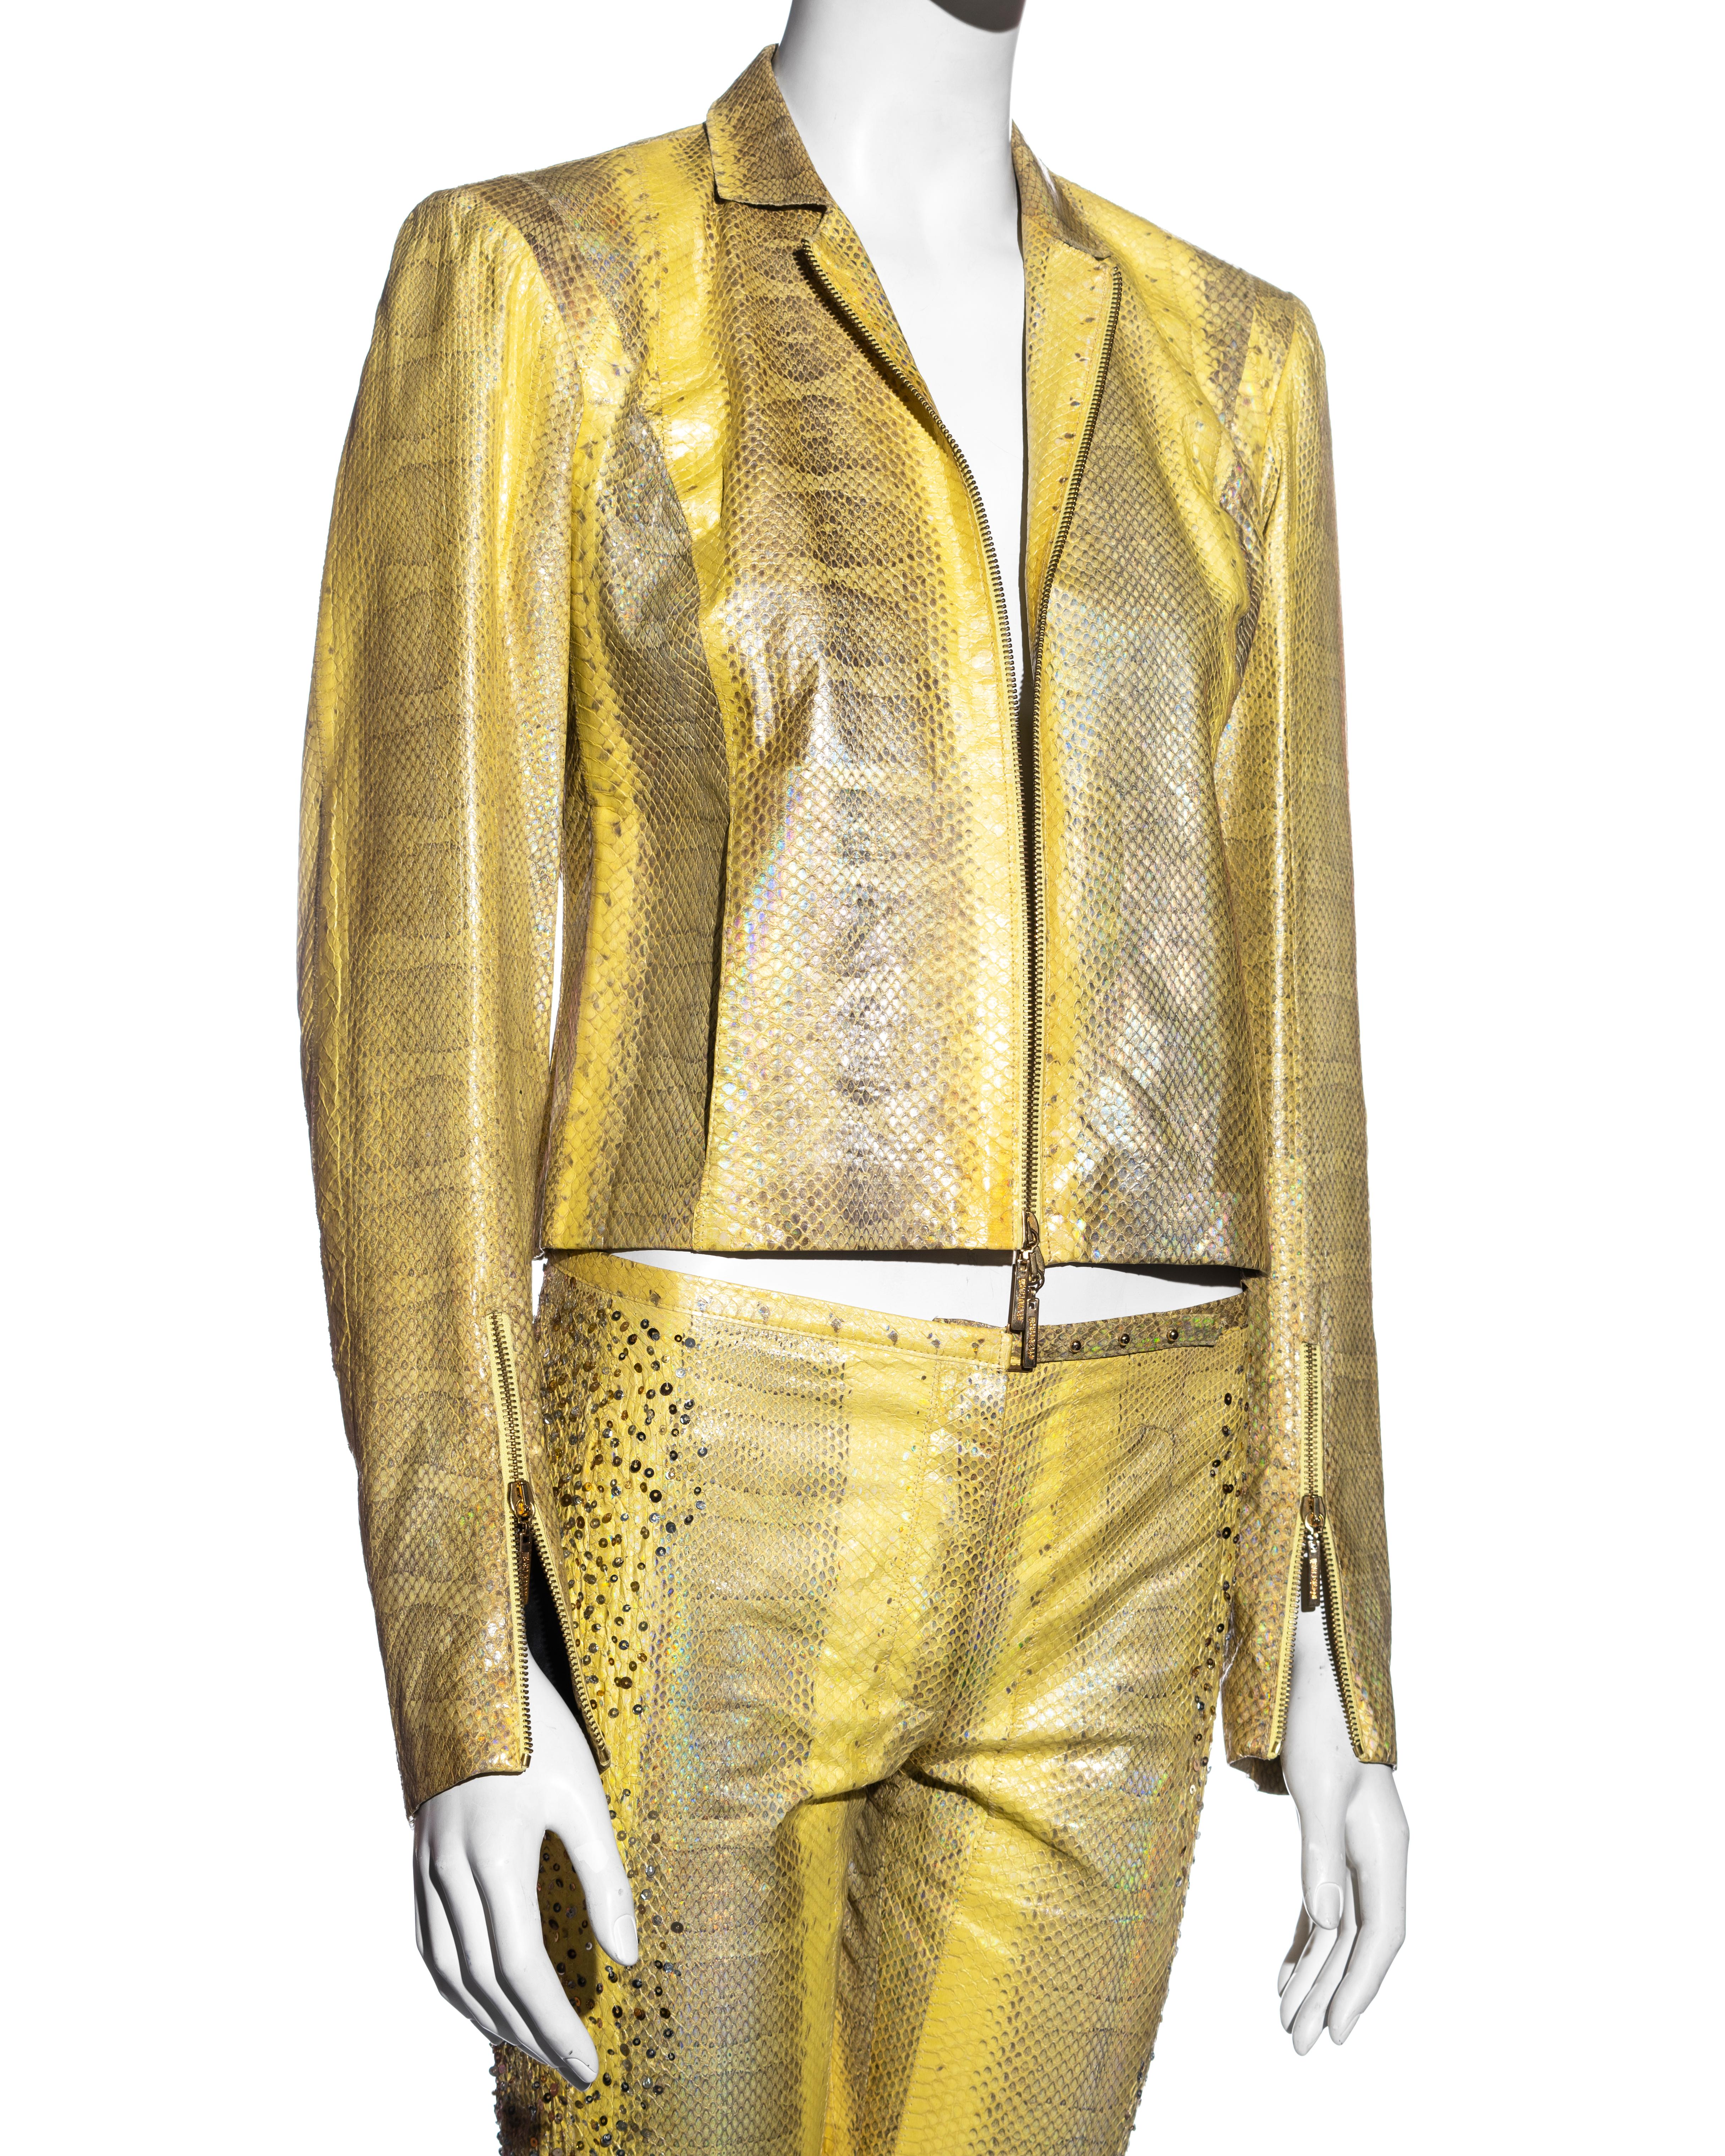 Roberto Cavalli yellow iridescent snakeskin pant suit with sequins, ss 2001 In Excellent Condition For Sale In London, GB